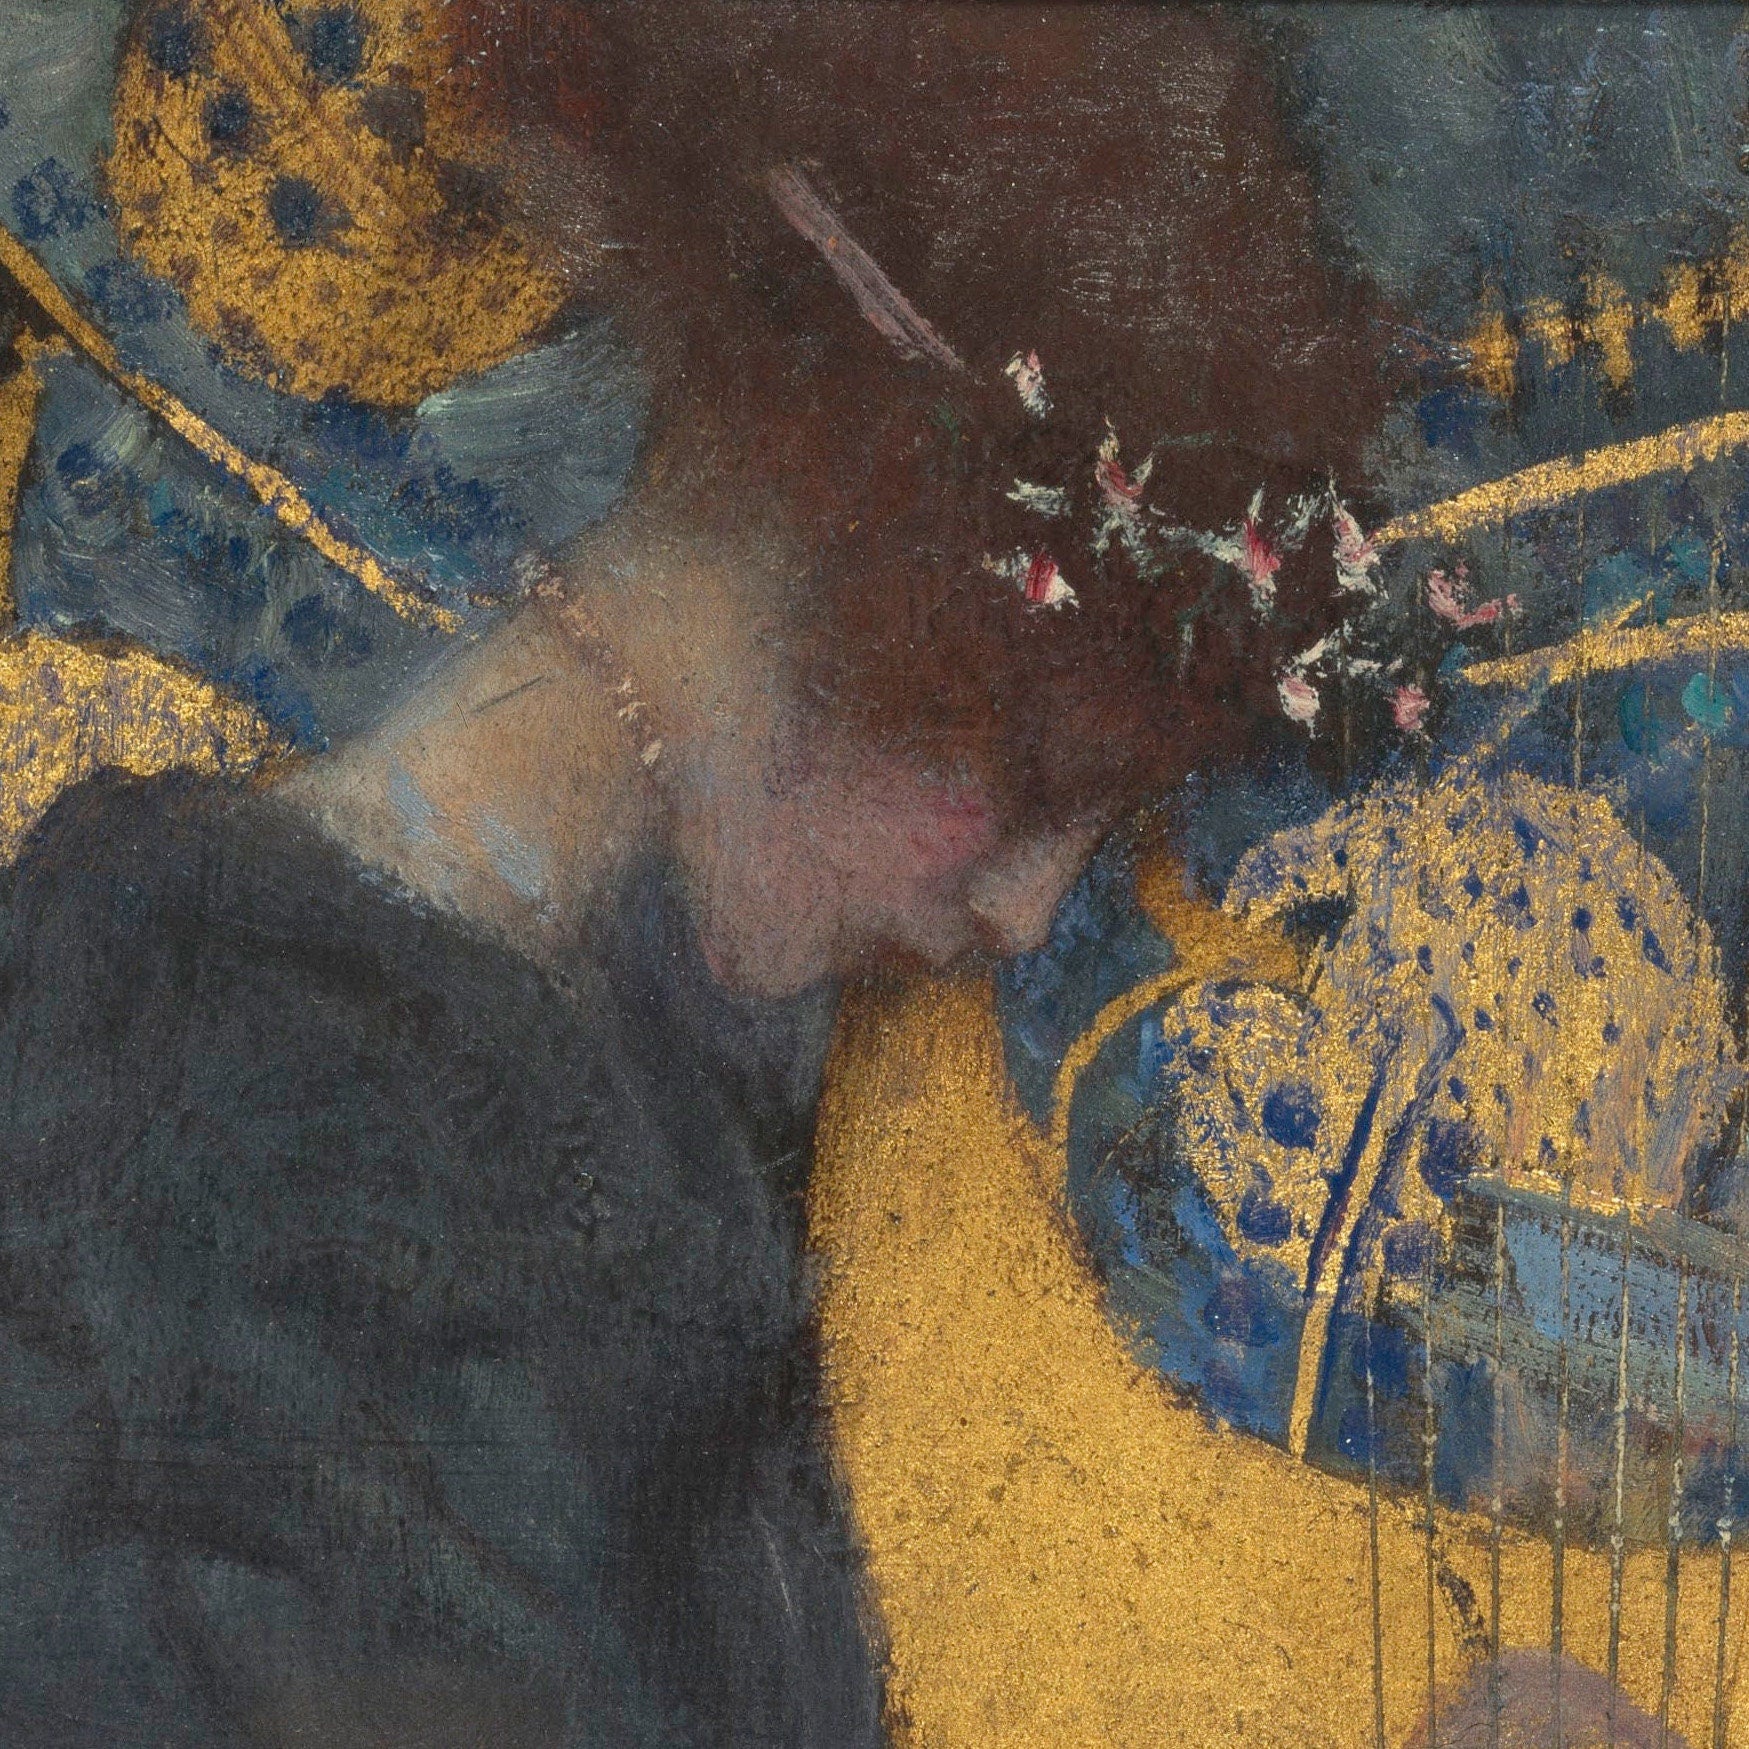 Music by Gustav Klimt, 3d Printed with texture and brush strokes looks like original oil-painting, code:370